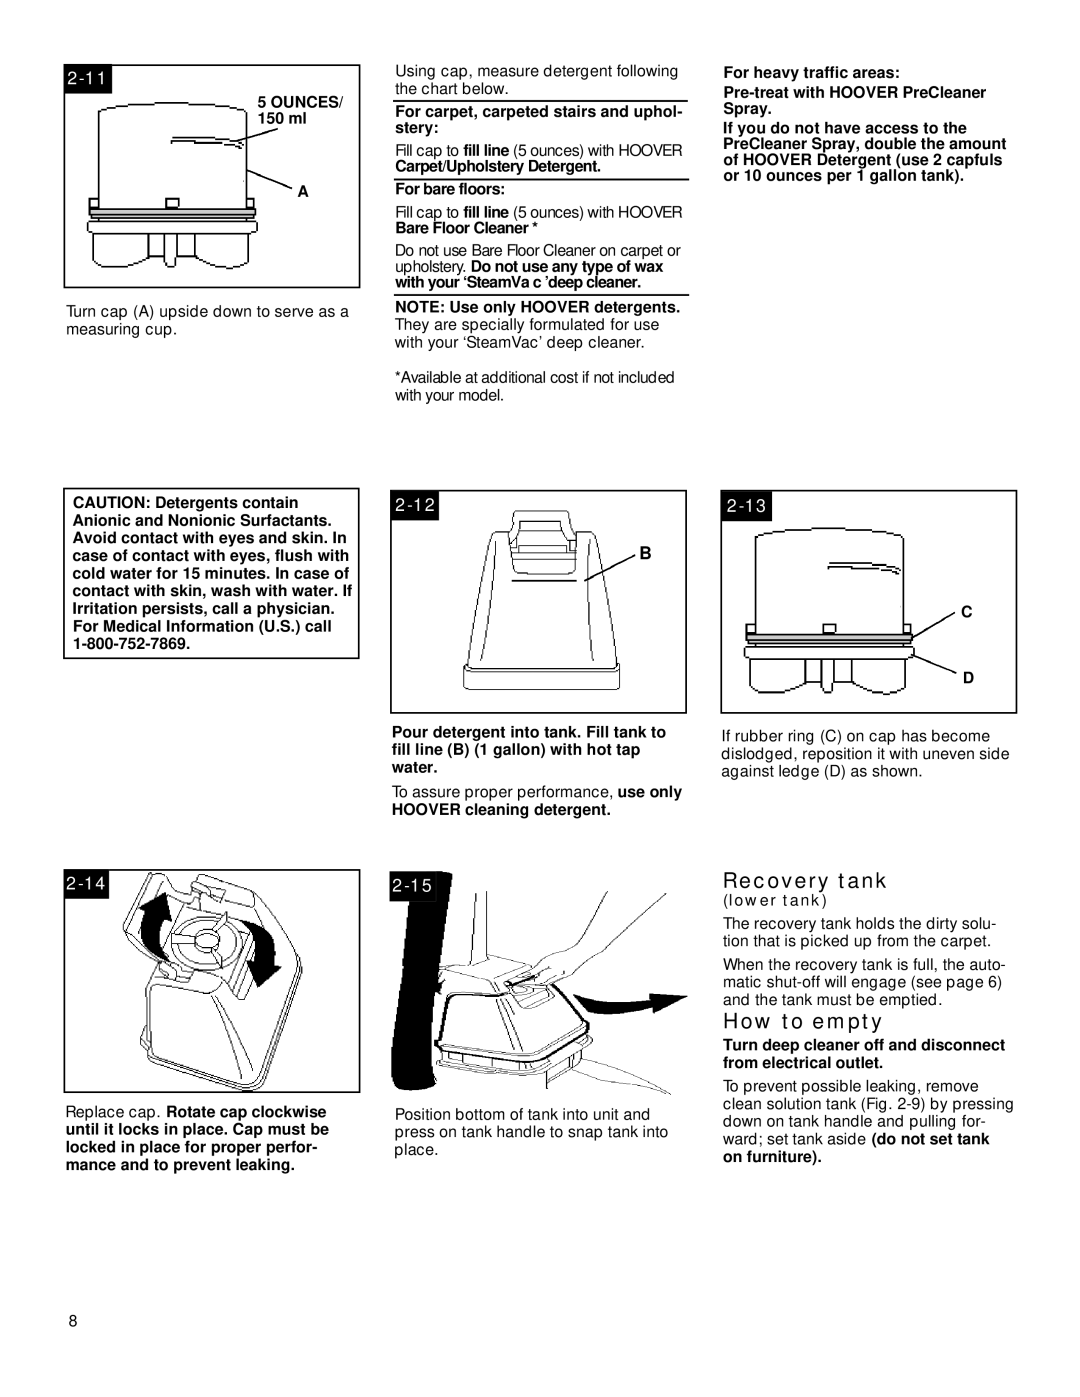 Hoover SteamVacuum owner manual Recovery tank, How to empty 